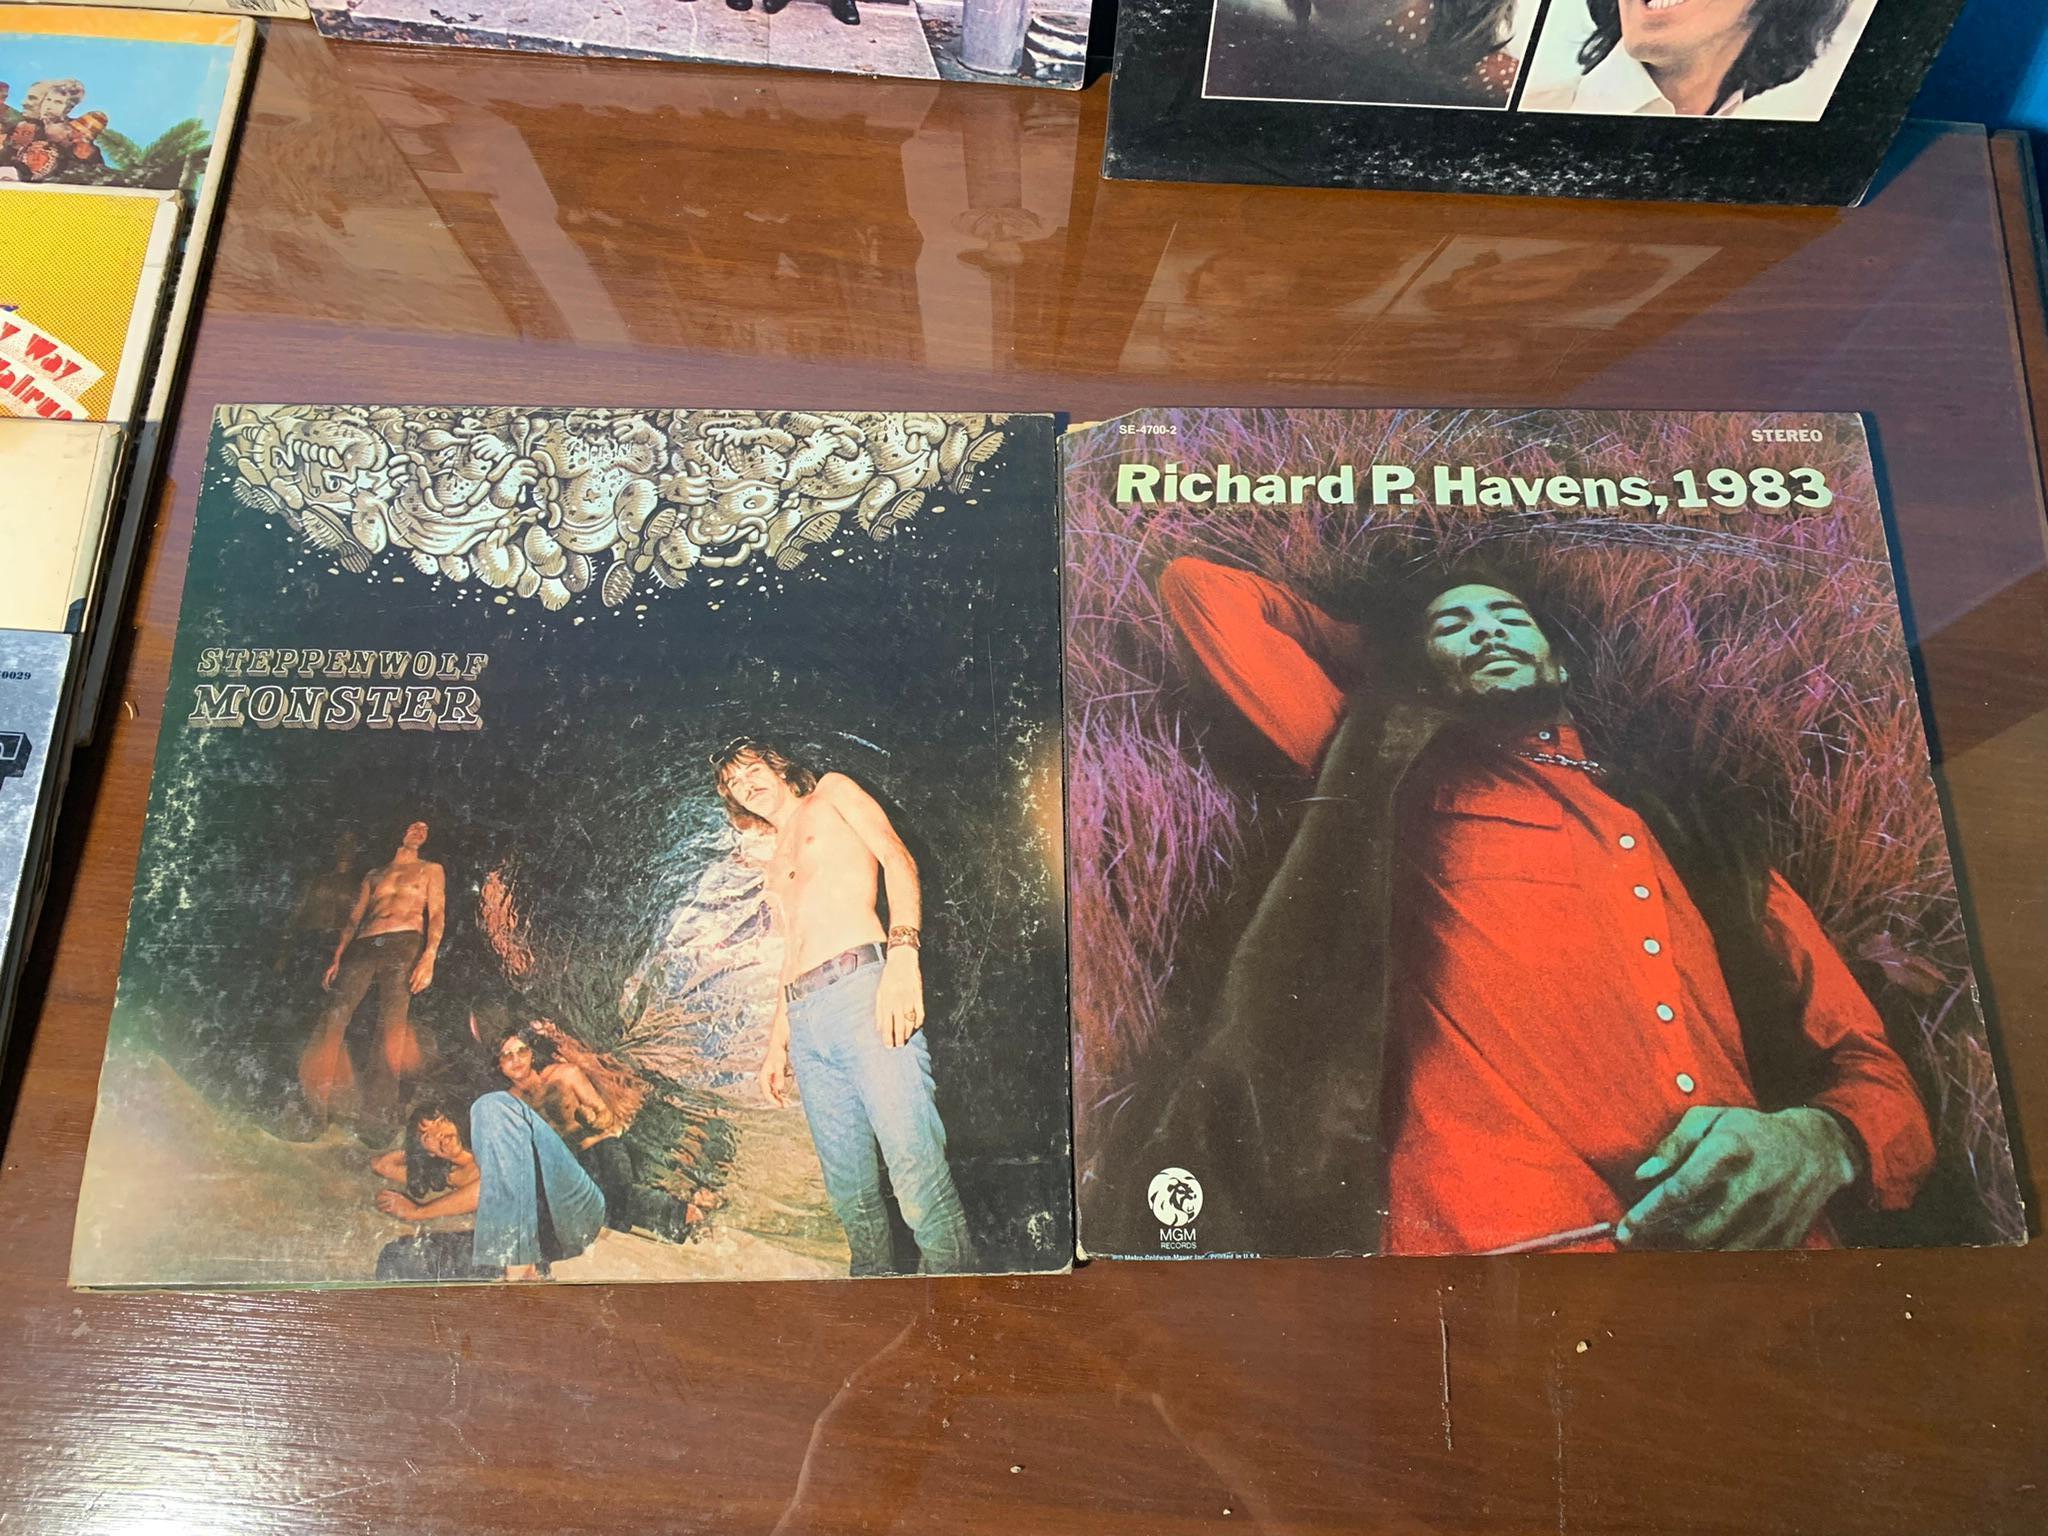 Group of 15 Records - The Beatles, Donovan, Steppenwolf & More